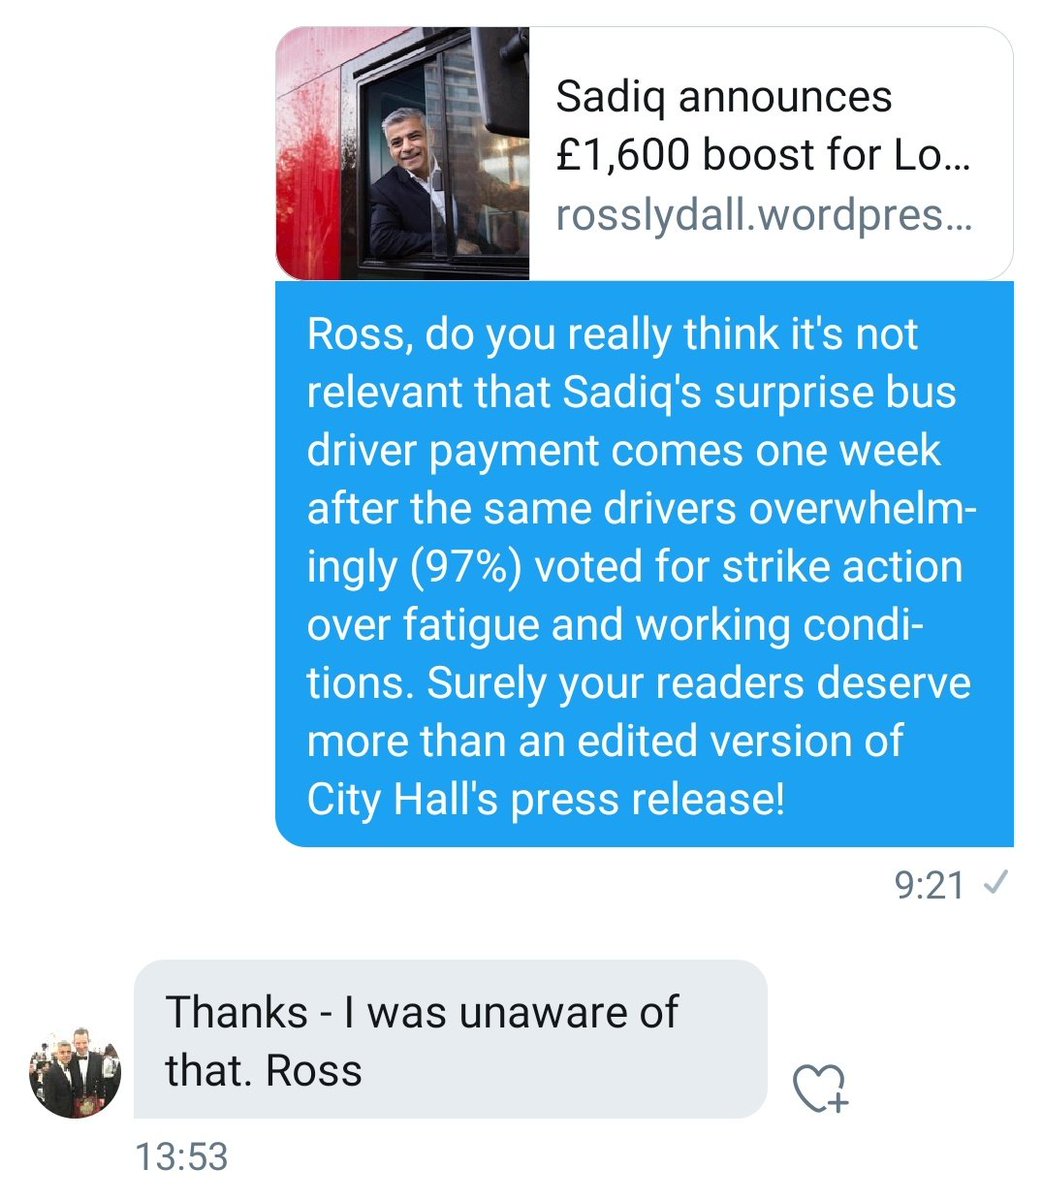 Luckily I have a screenshot of our recent DMs. Context: 10/2/20, 97% of bus drivers voted for a strike ballot over fatigue, Ross is silent; 17/2/20, Mayor bungs drivers £1600 retention bonus each, Ross parrots Mayor & Unite PR. Claims he was "unaware" of the strike vote. Really?